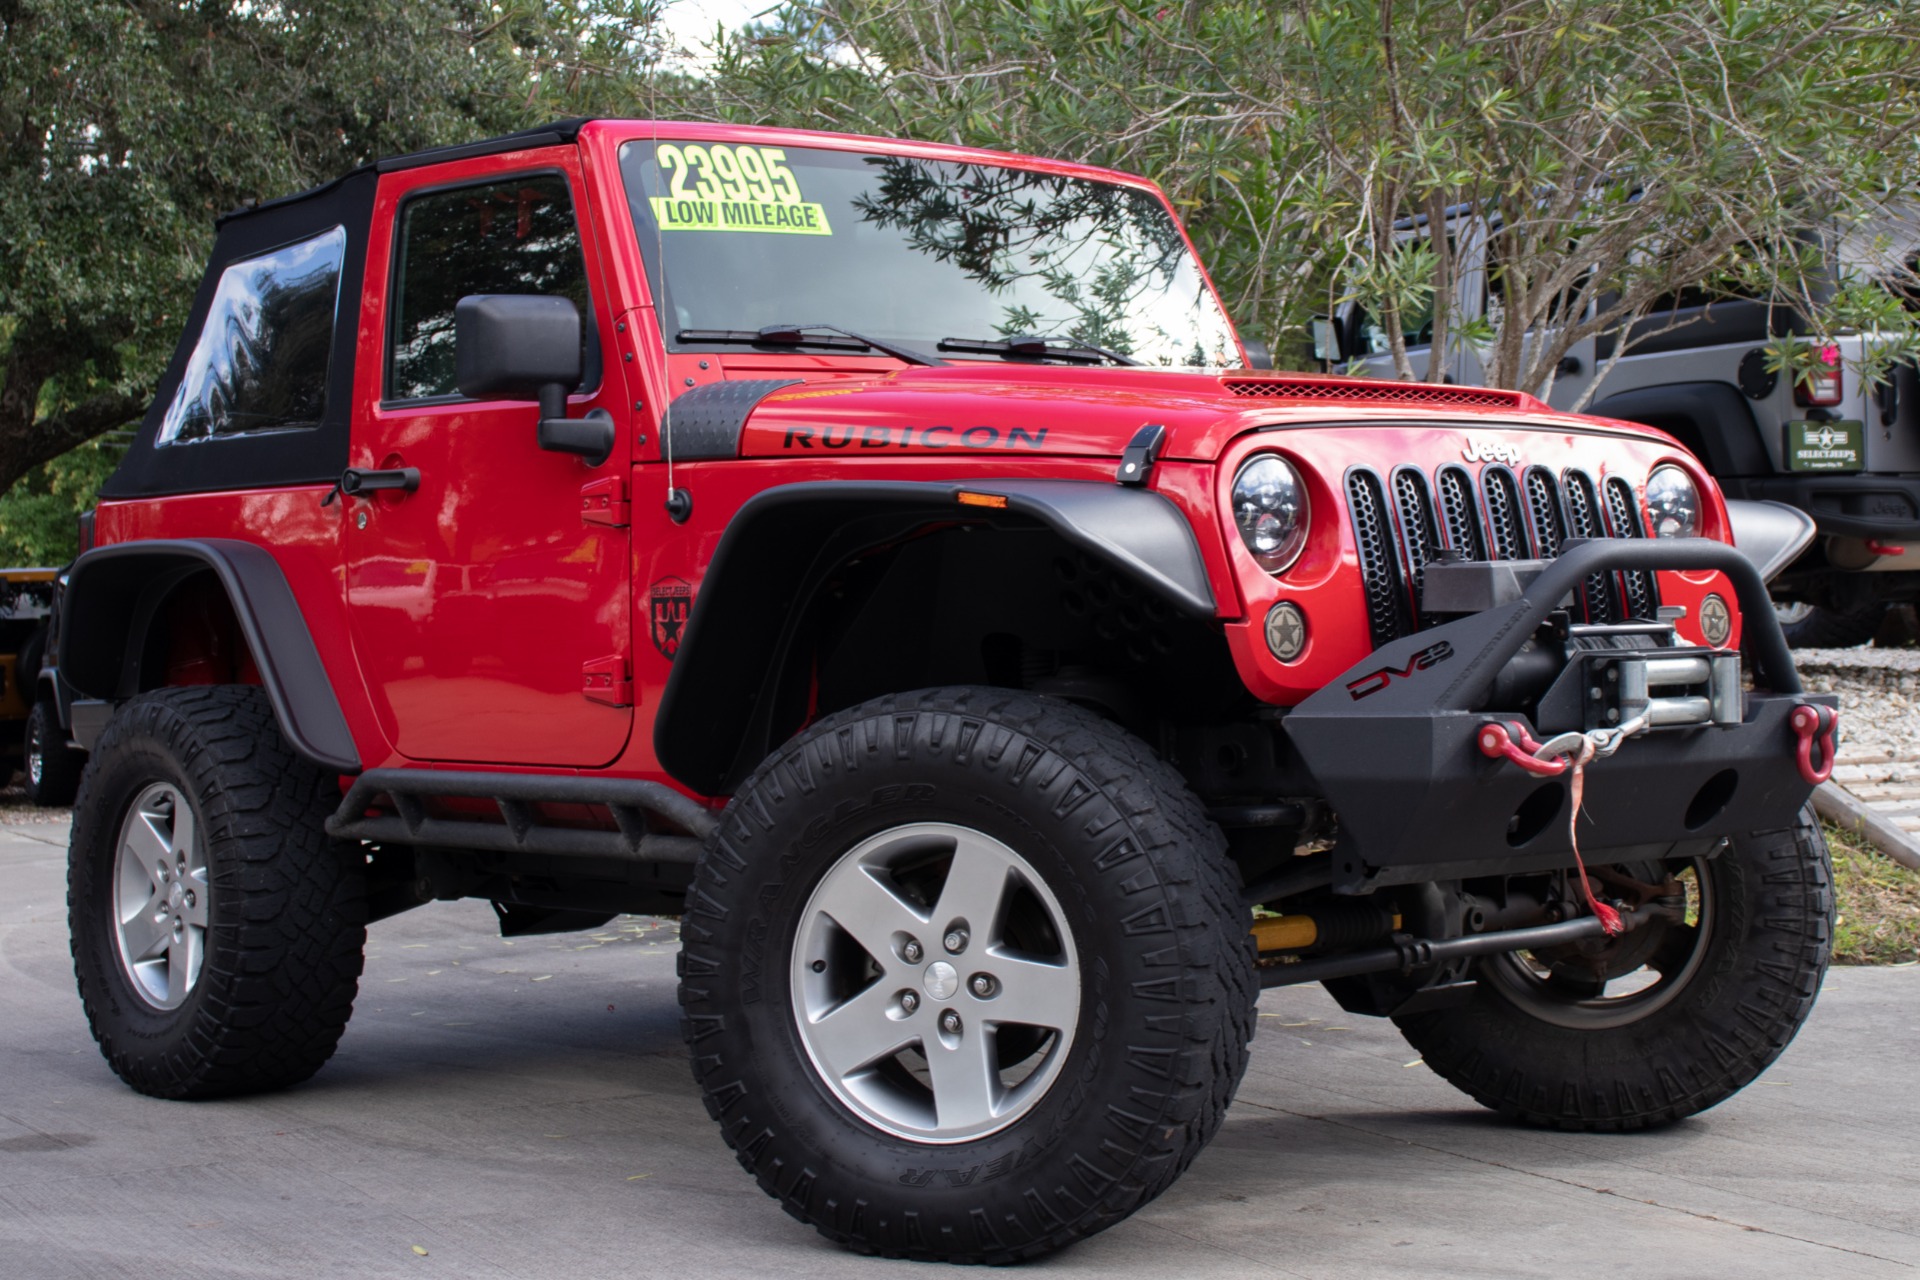 Used 2010 Jeep Wrangler Rubicon For Sale ($23,995) | Select Jeeps Inc ...